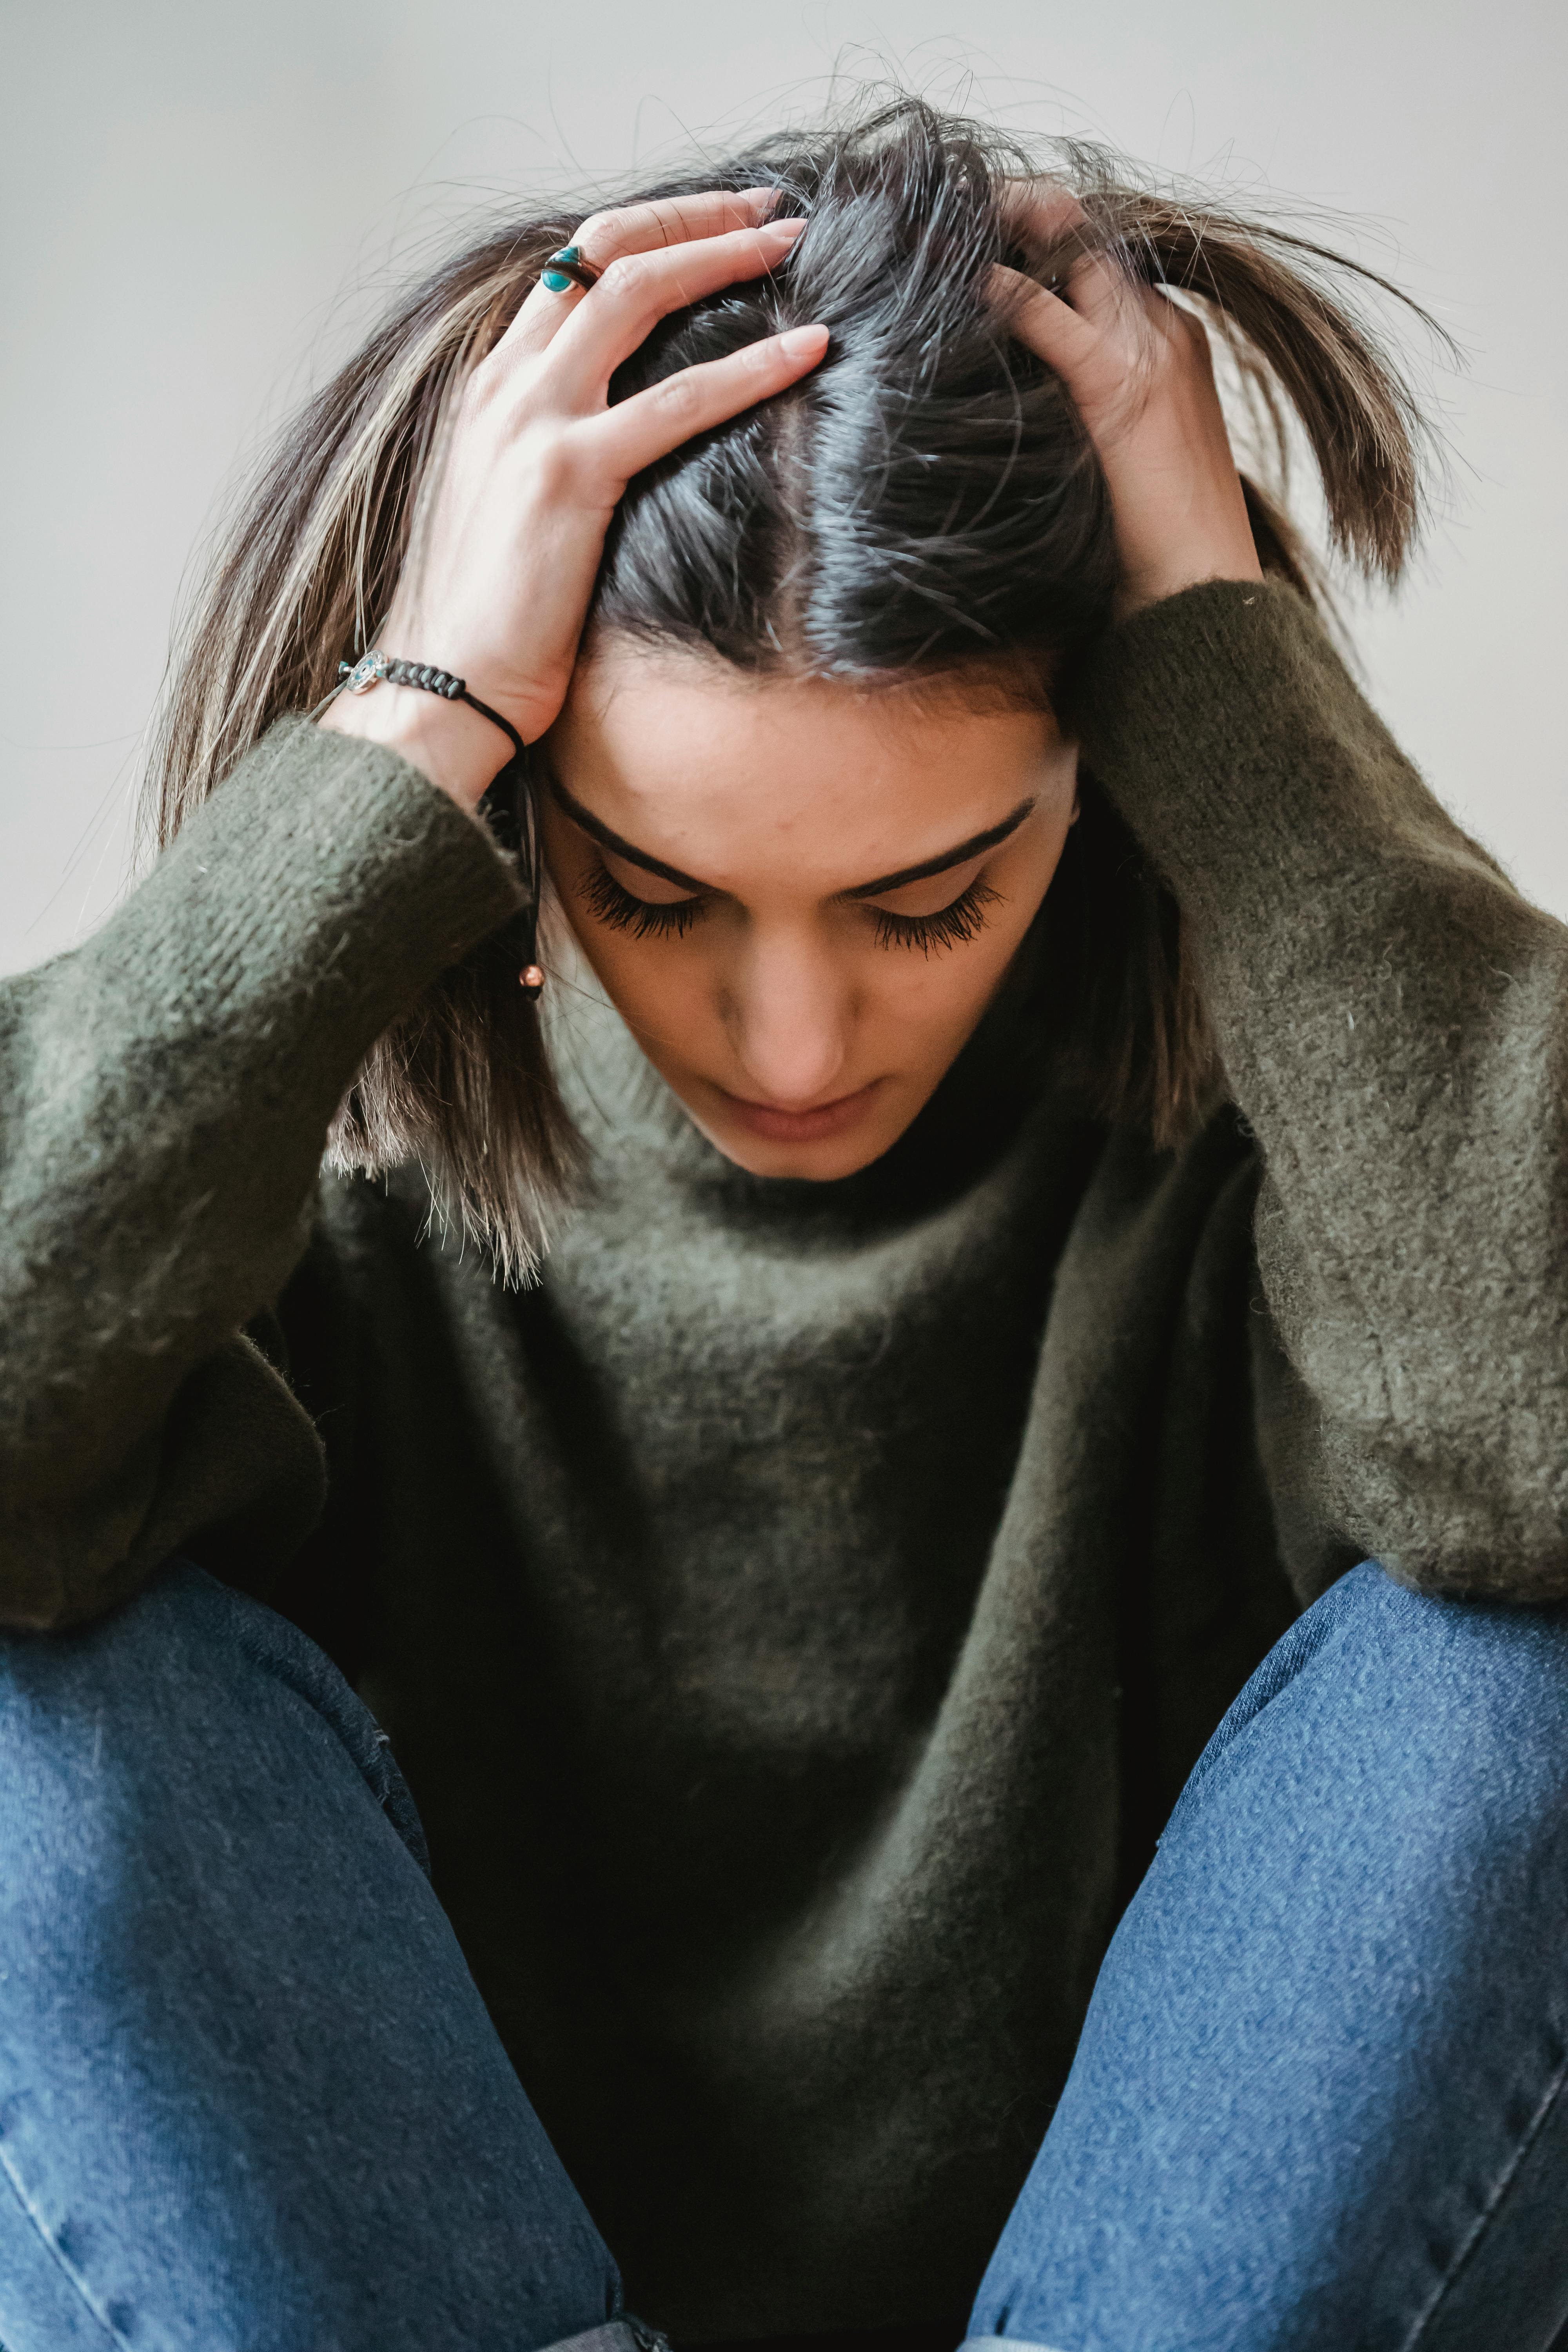 An upset woman looking down and holding her head | Source: Pexels